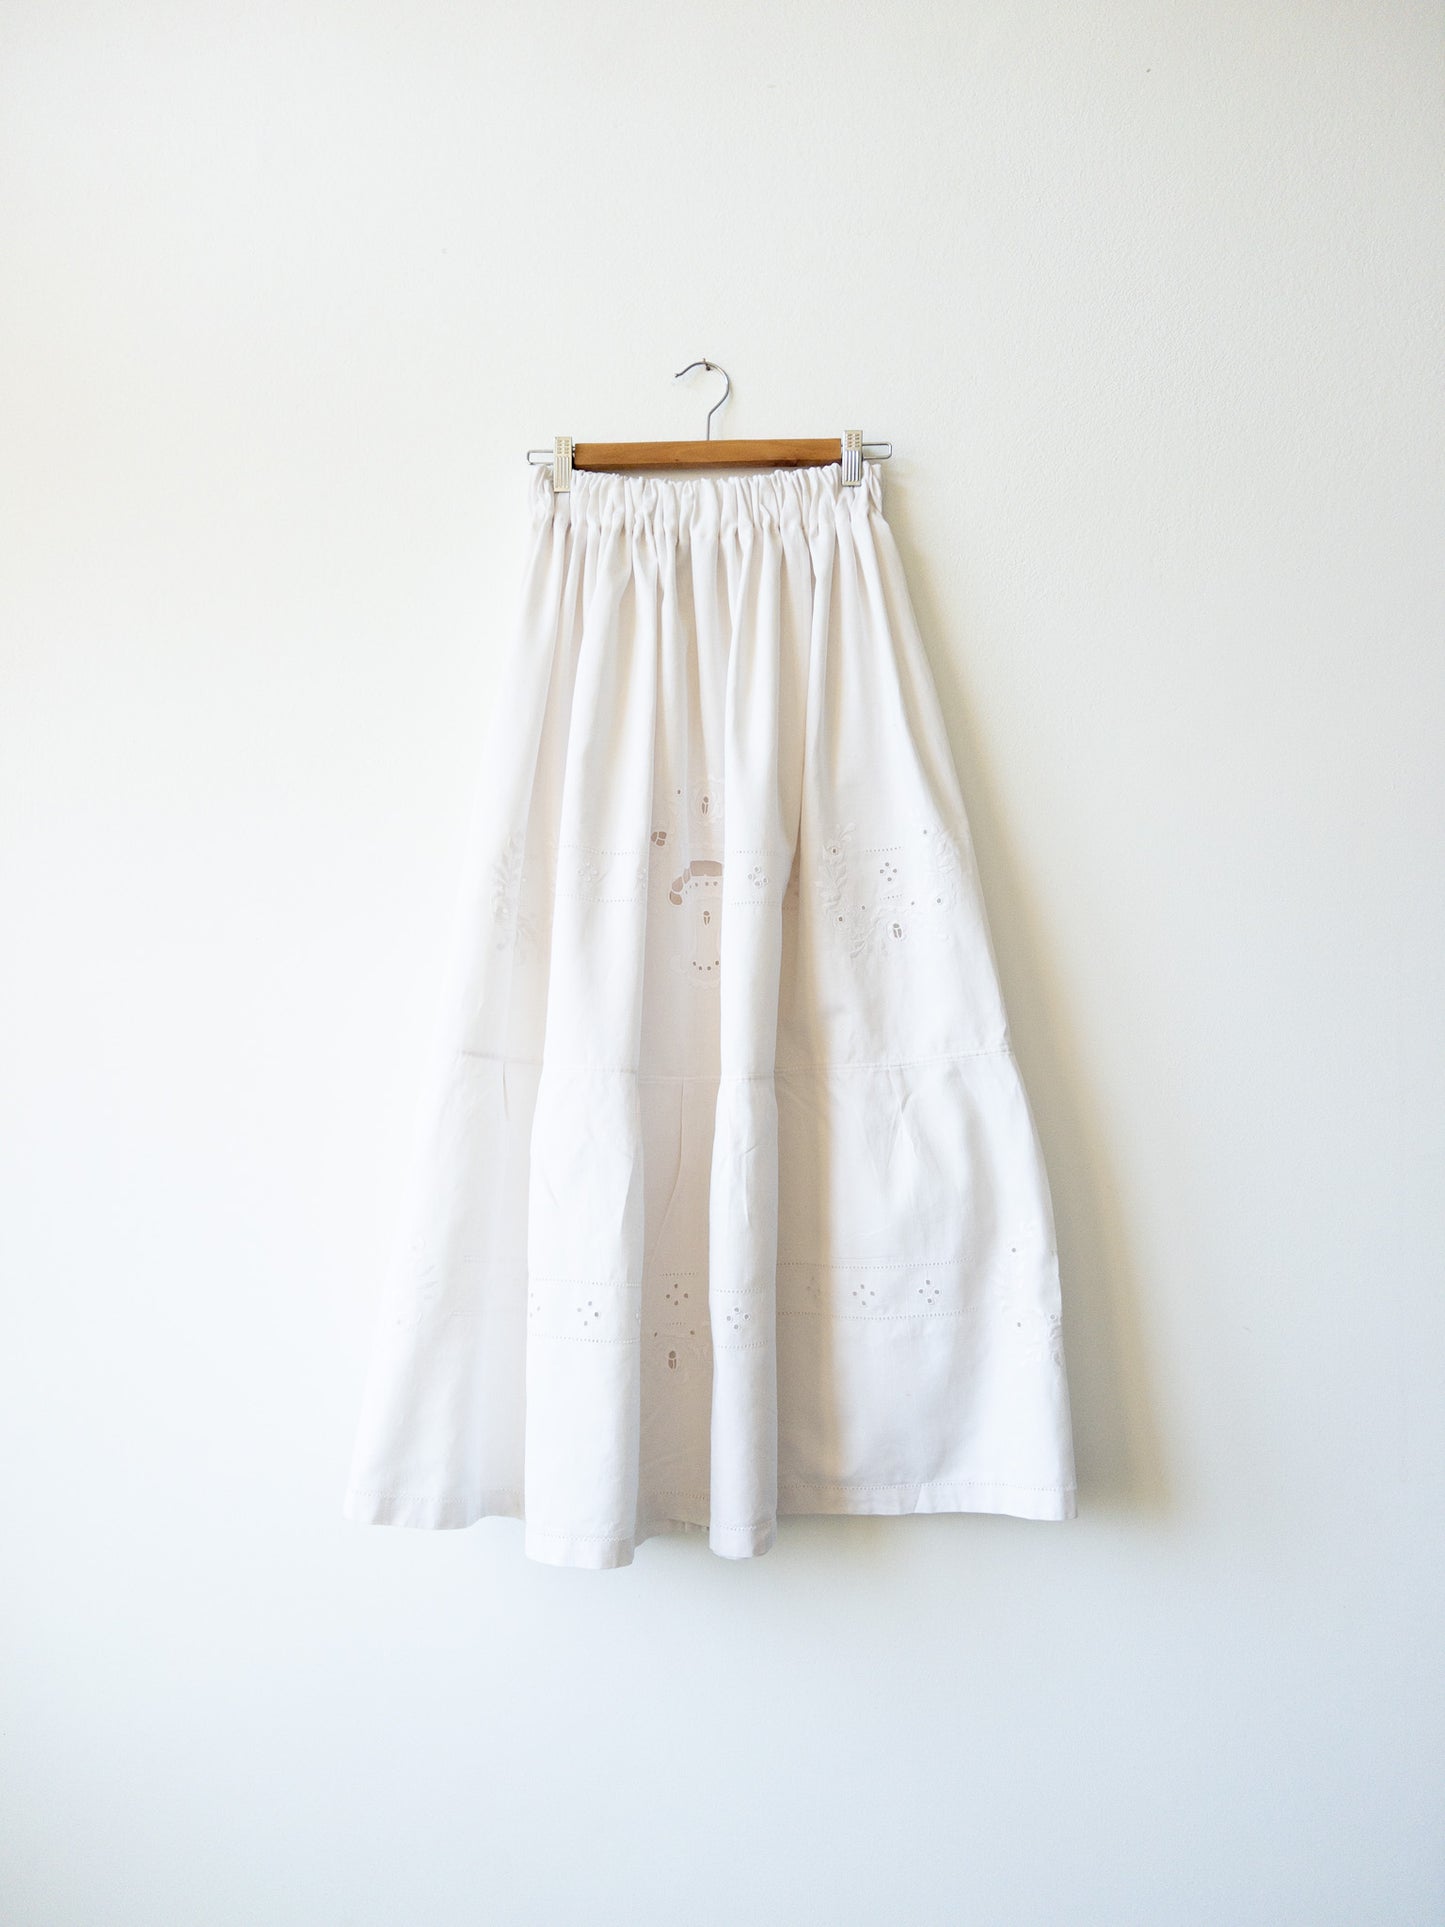 Skirt made of embroidered canvas